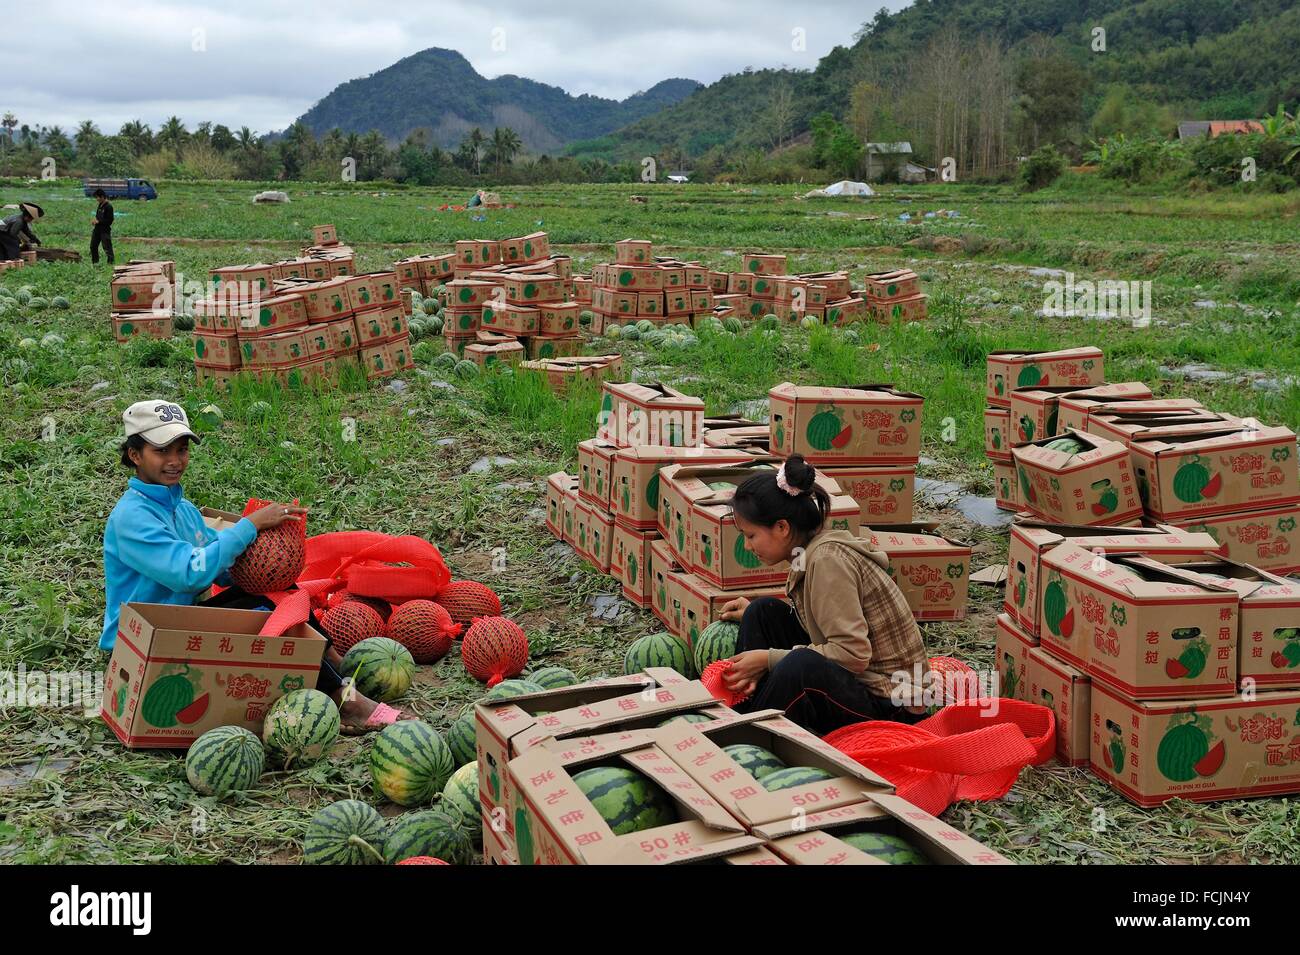 watermelon harvest on lands bought or rented by China for Chinese market, Nong Khiaw area, northern Laos, Southeast Asia. Stock Photo